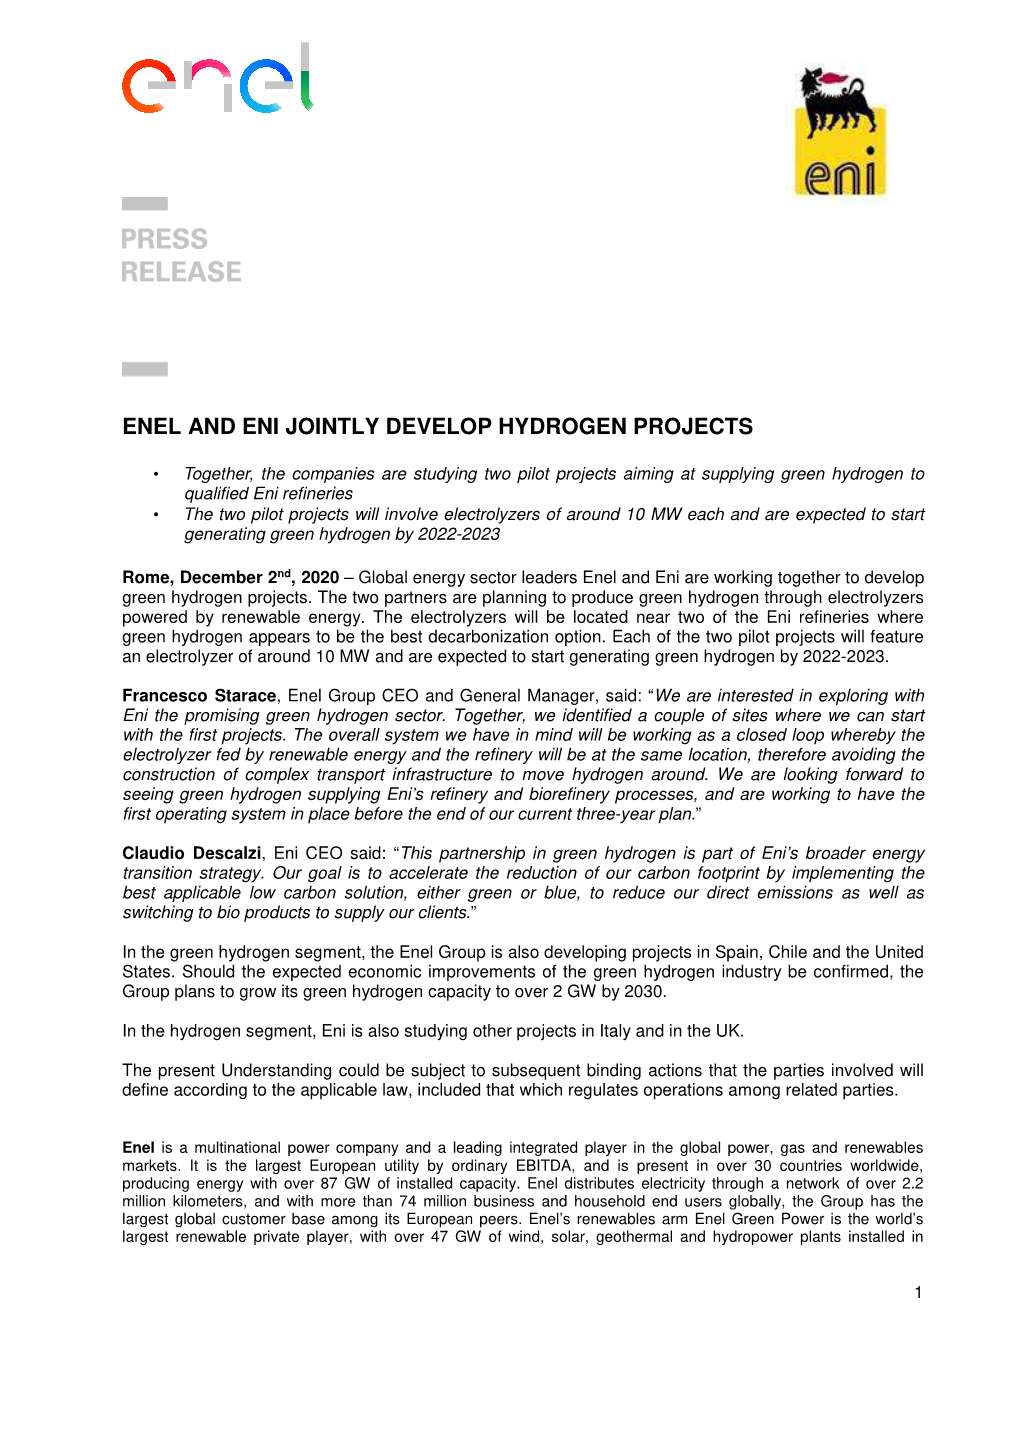 Enel Hydrogen Project With